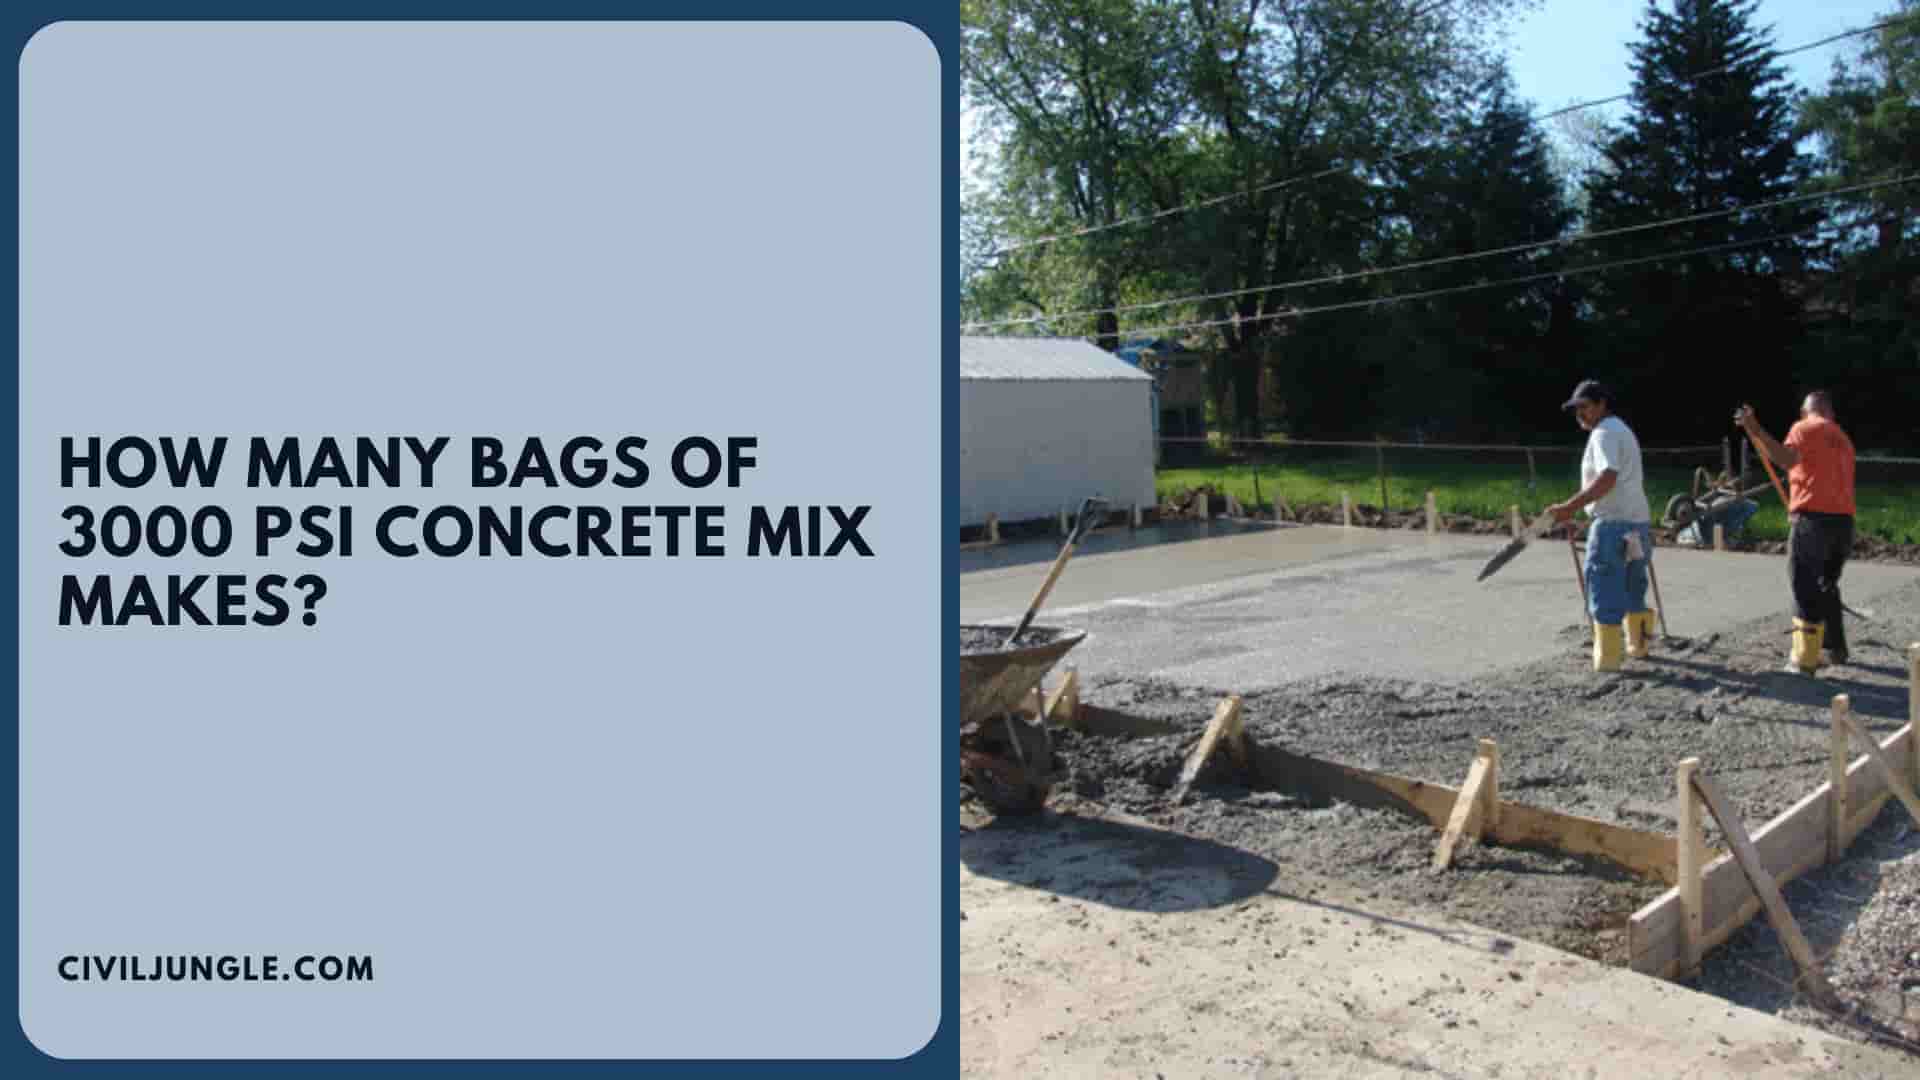 How Many Bags of 3000 PSI Concrete Mix Makes?